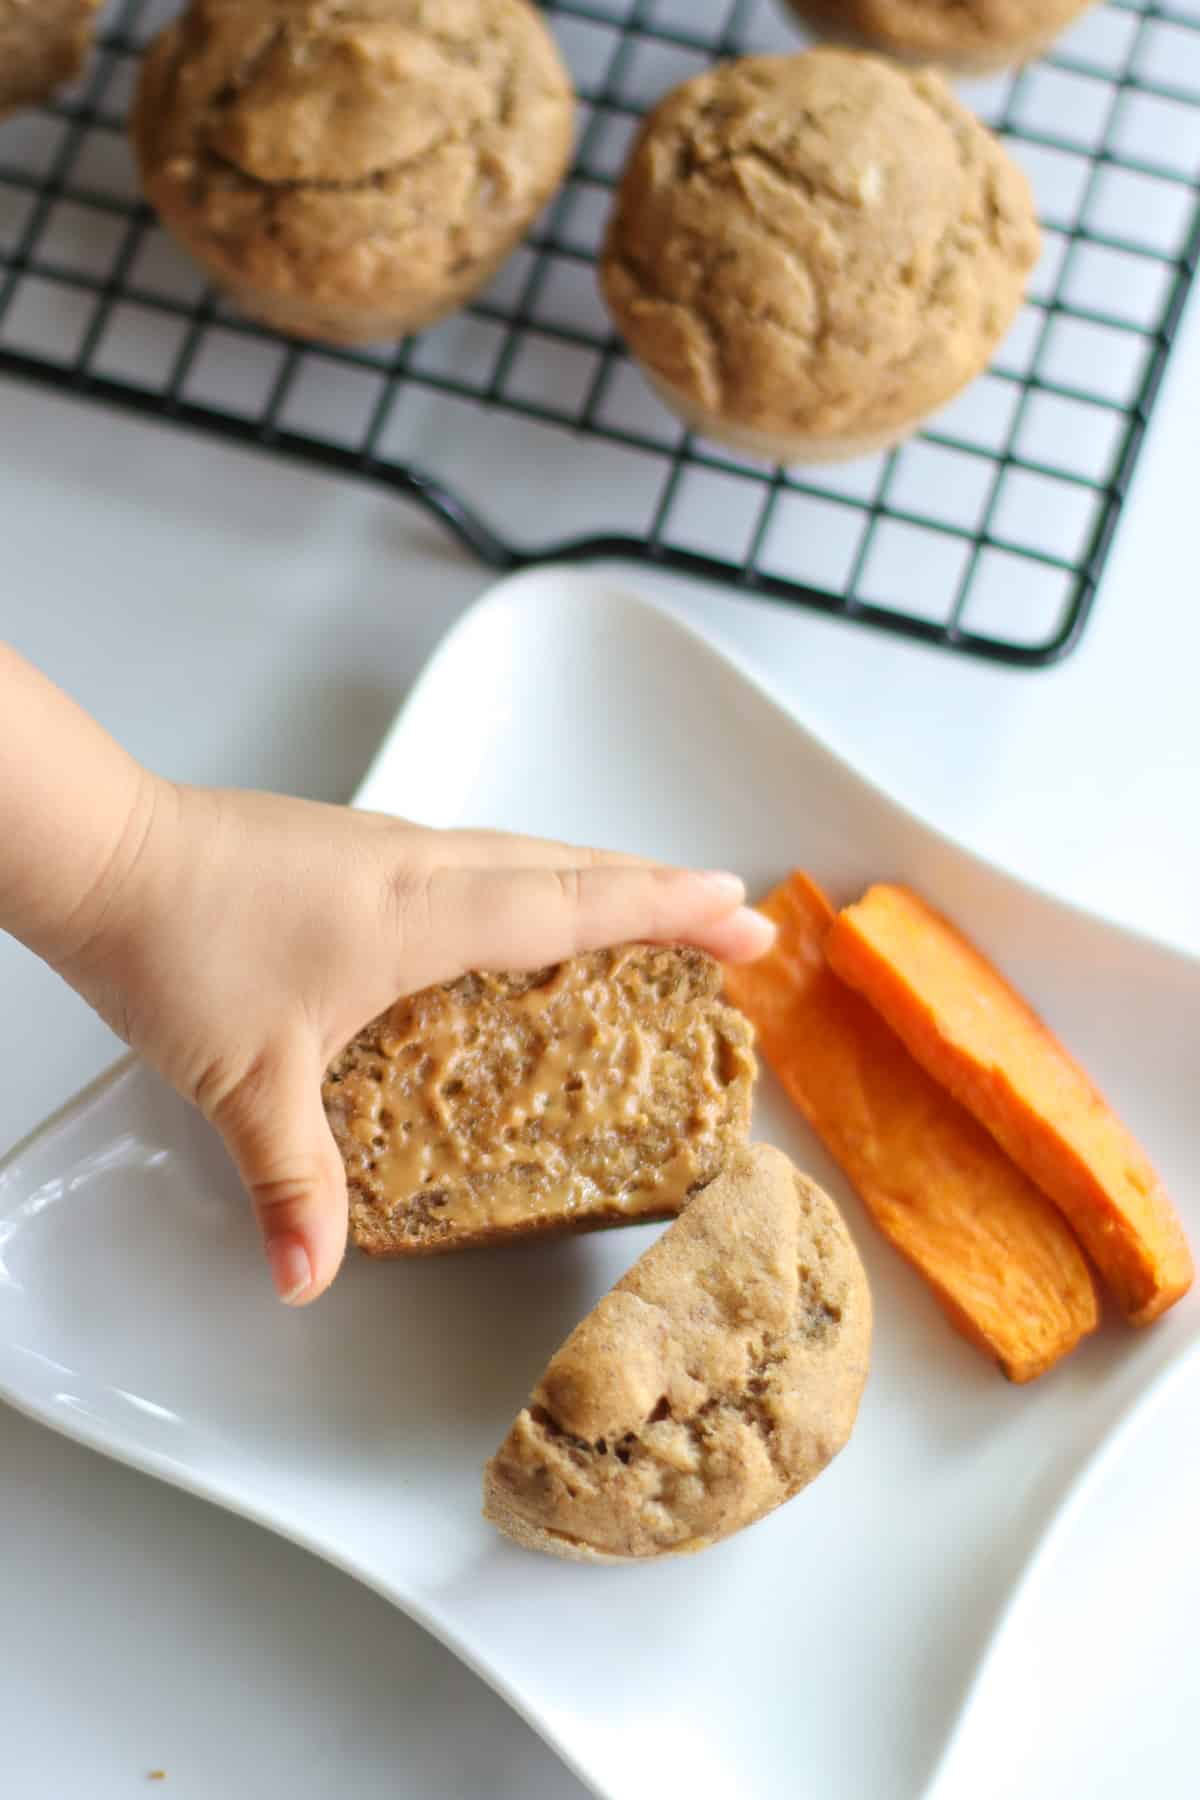 Toddler's hand reaching for halved muffin spread with peanut butter.